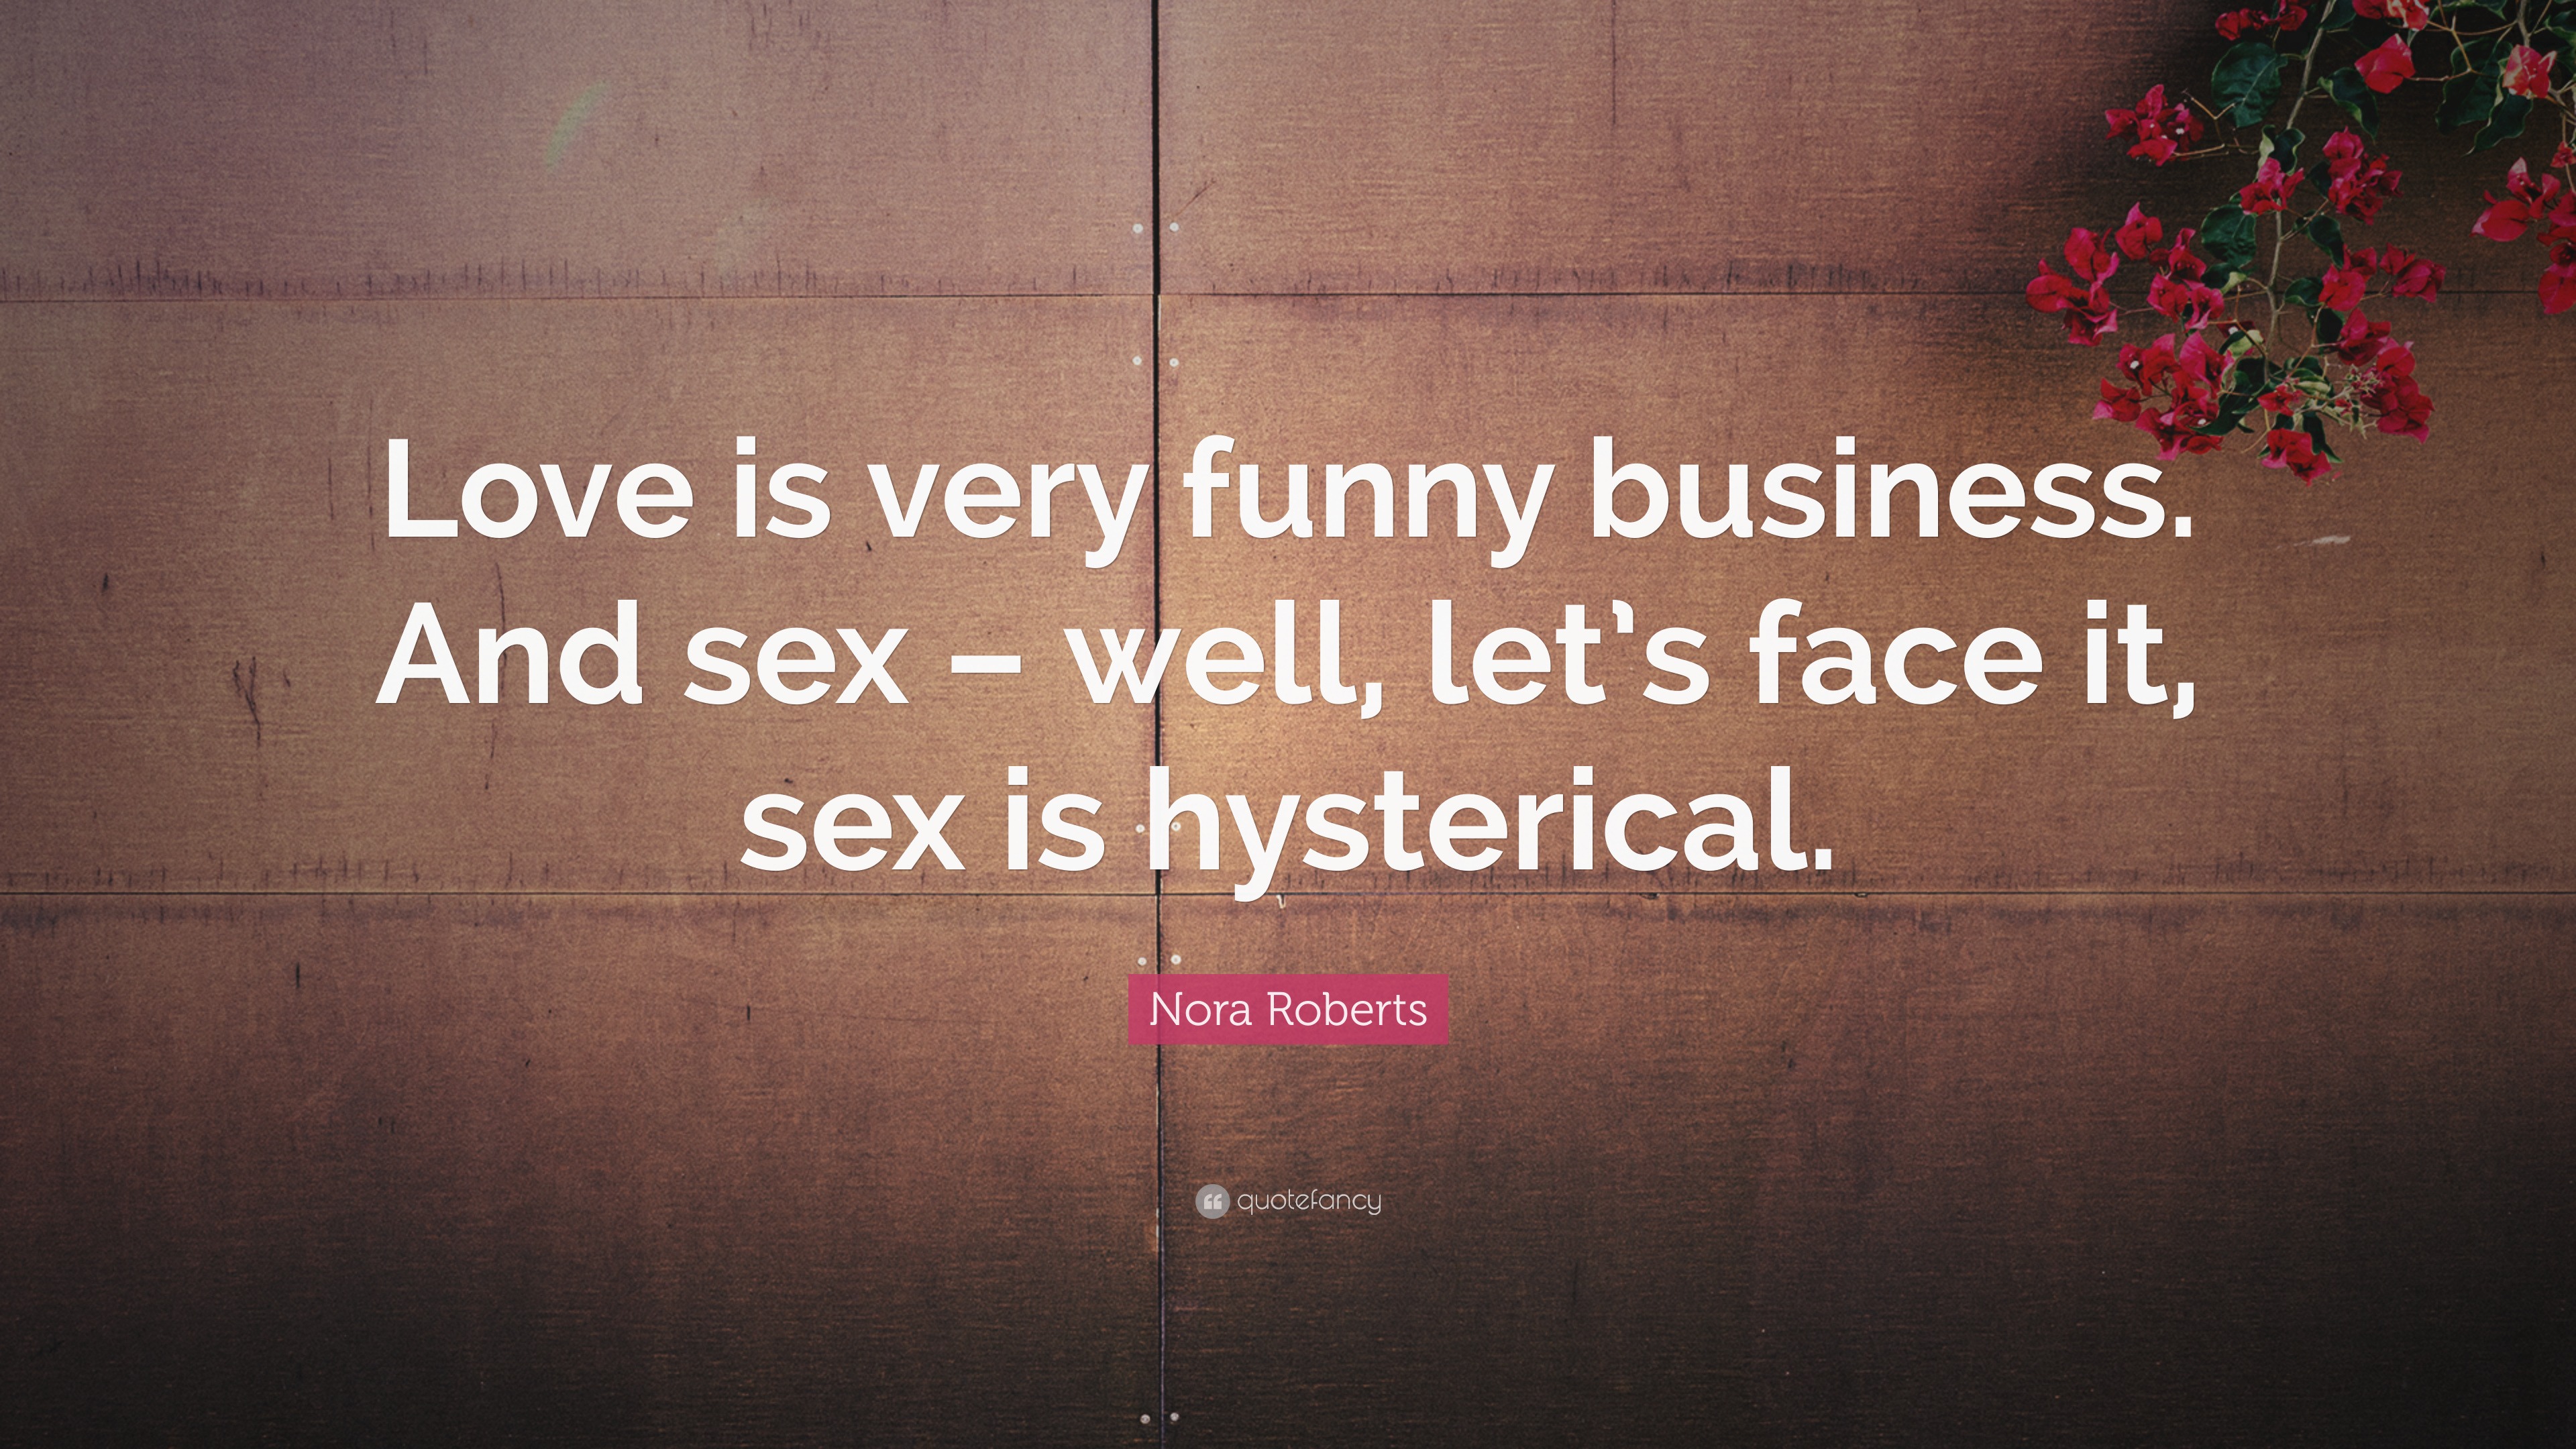 Nora Roberts Quote “love Is Very Funny Business And Sex Well Lets Face It Sex Is Hysterical” 